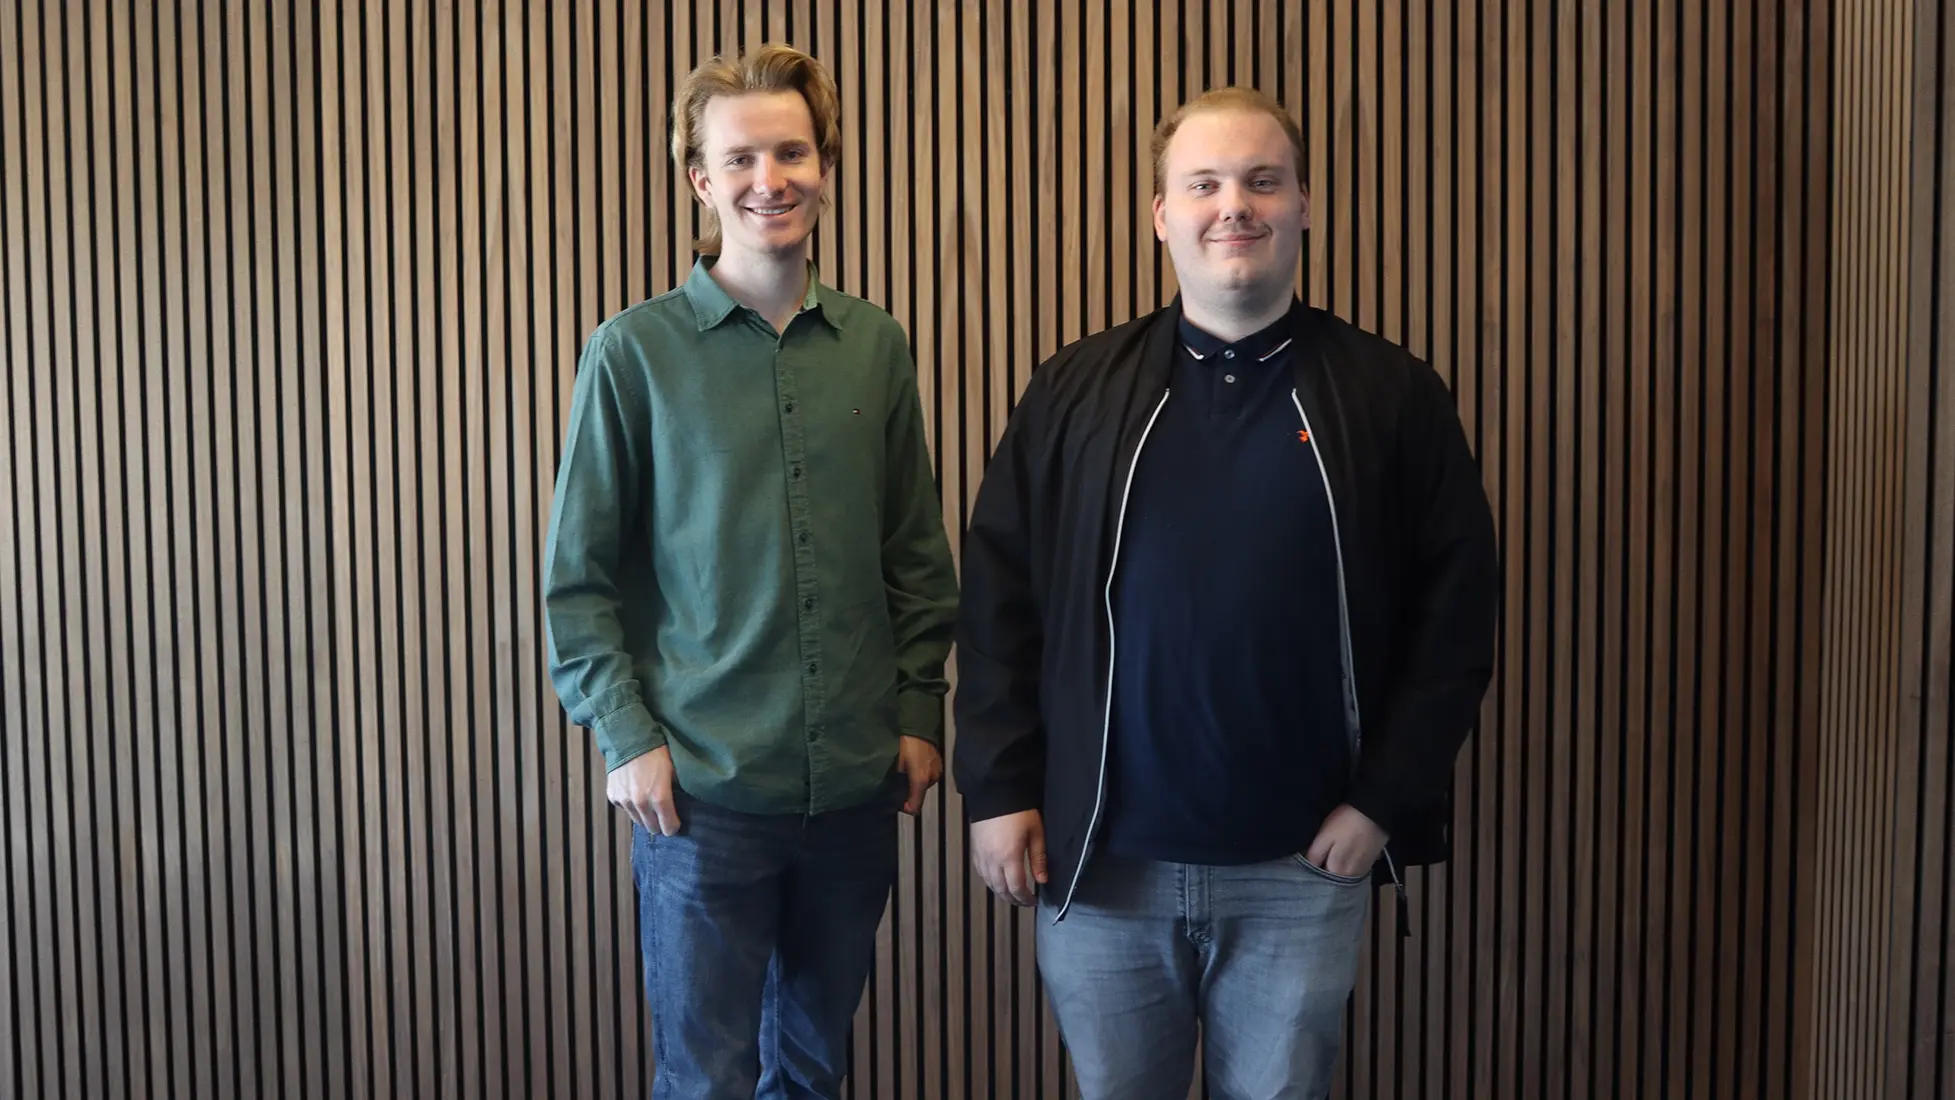 New consultants, Mikkel & Morten who will help our customers with ITSM